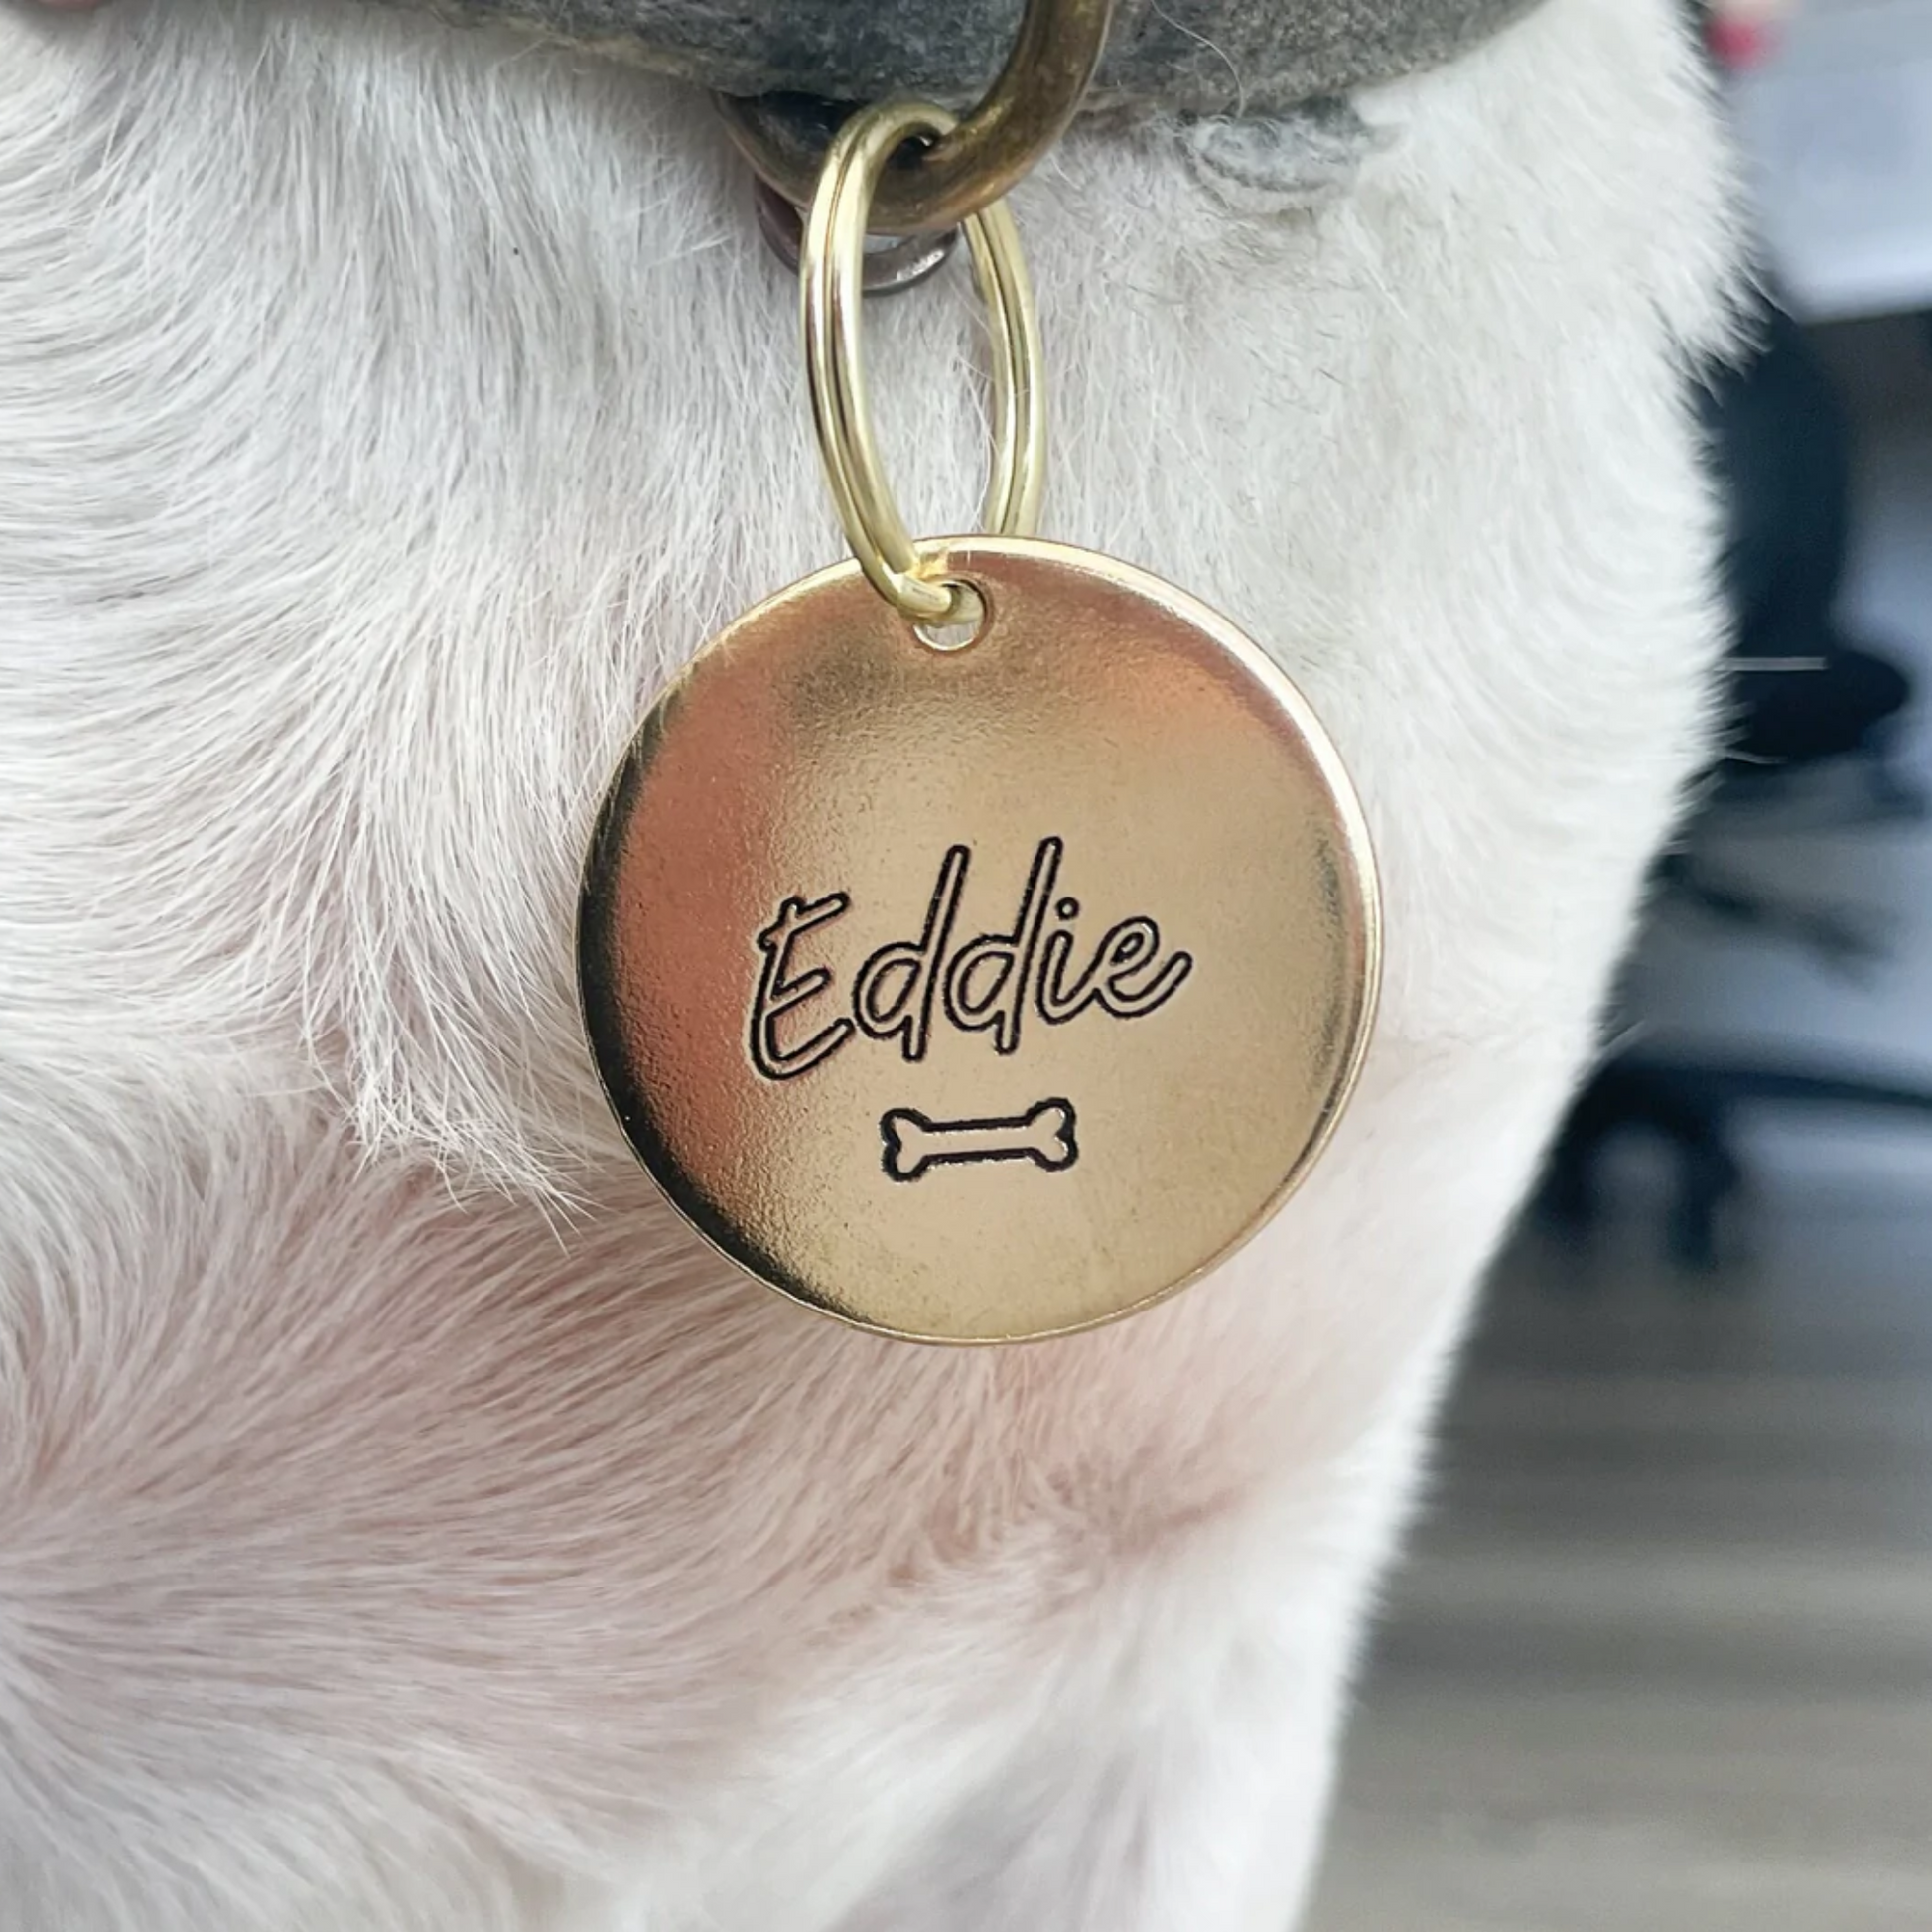 Personalized Dog Tag - Dog Bone Dog Tag Engraved - Cat ID Tag - Dog Collar Tag - Custom Dog Tag - Pet ID Tag - Pet Name Tag - Microchipped - Dog Gear - Pet name on front with a bone design. Your phone number will be on the back.